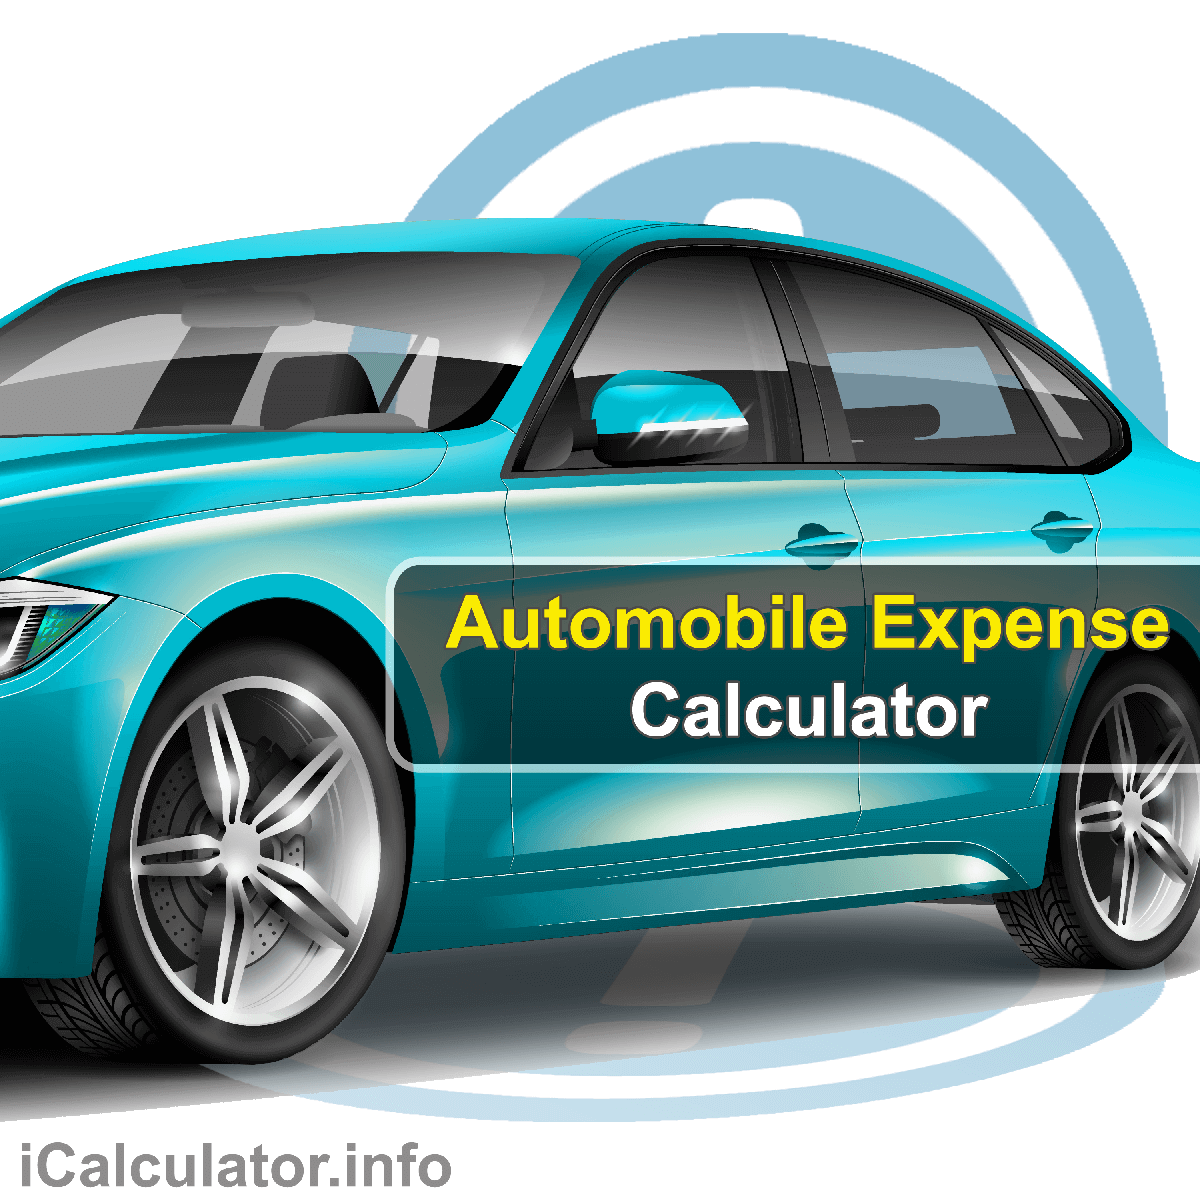 Automobile Expense Calculator. This image provides details of how to calculate the expense of using and maintaining a car using a calculator and notepad. By using the car finance formula, the Automobile Expense Calculator provides a true calculation of the the running cost of your automobile on an anual and monthly basis.